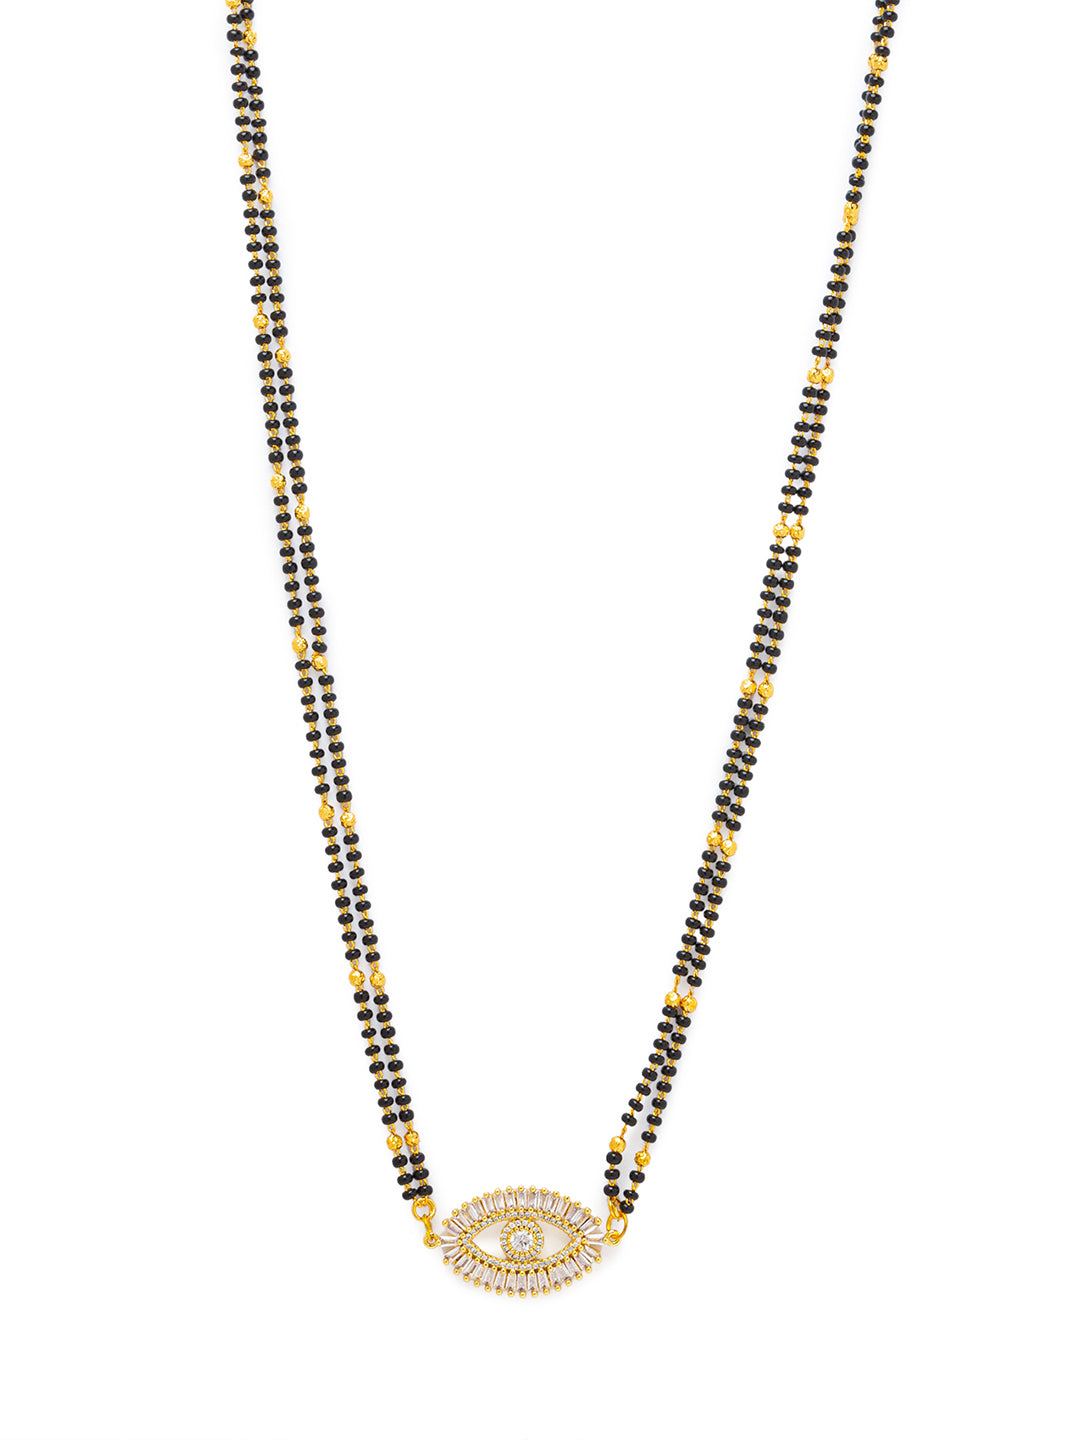 Digital Dress Room Digital Dress Room Diamond Gold Plated Long Mangalsutra मंगलसूत्र Latest Design/Cz Solitaire/Black Beads Chain New Mangalsutra Designs For Women (24 Inches) 